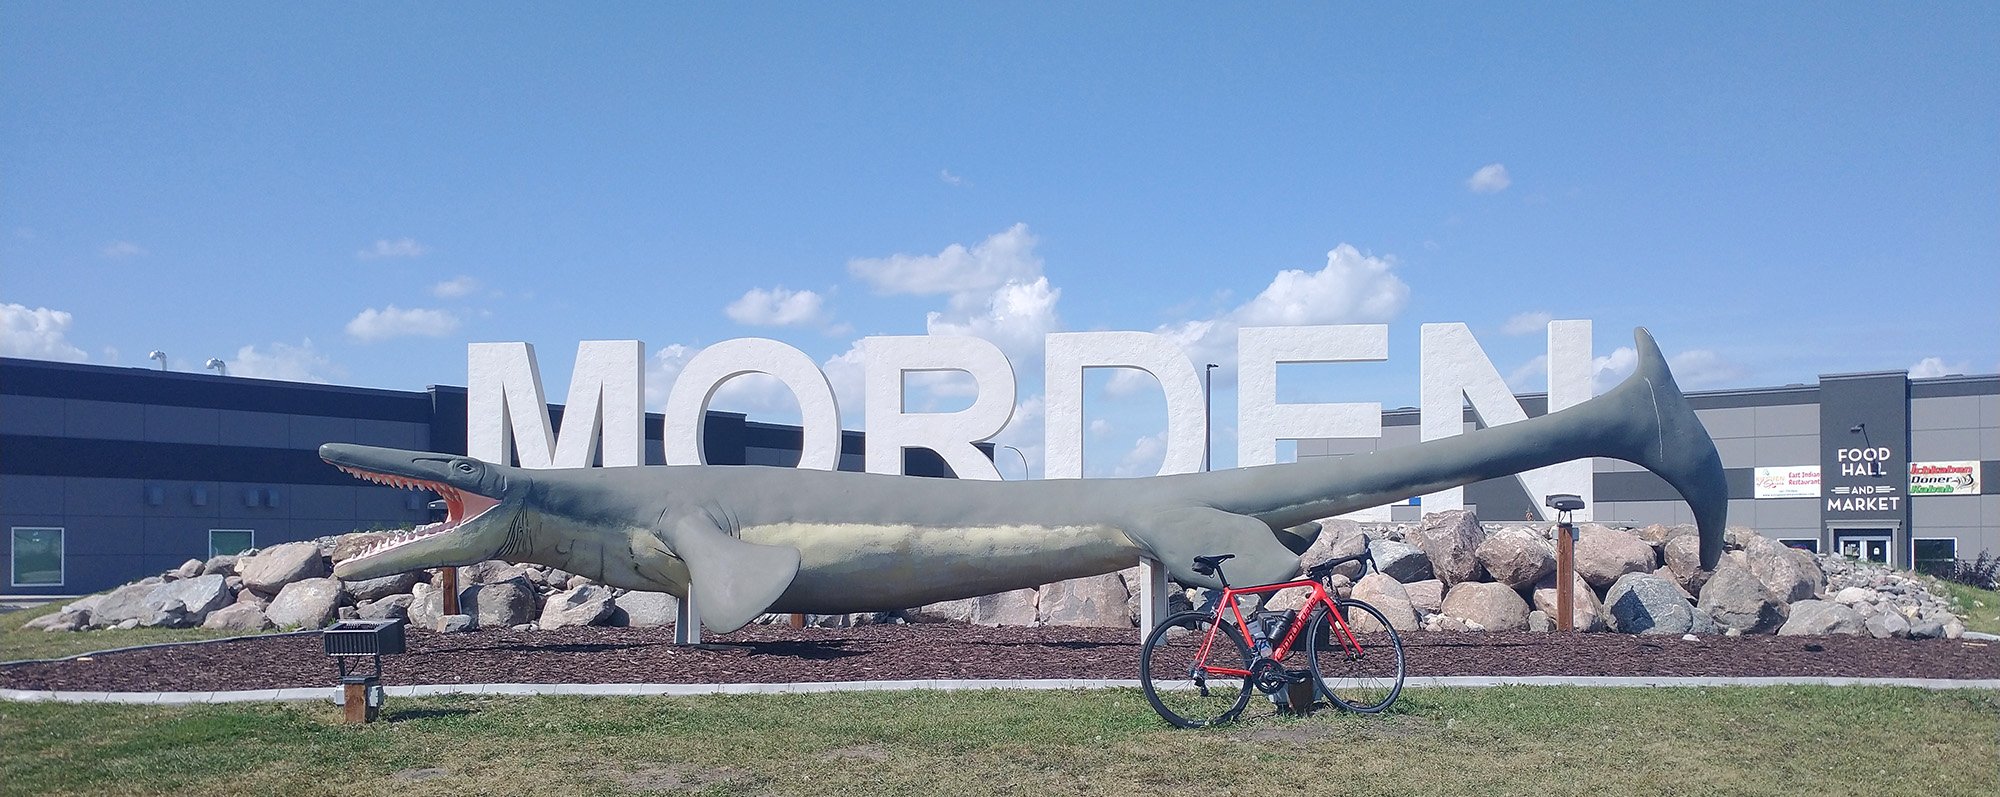 City of Morden, Manibota! They scattered a few big dinosaur statues for tourists to find.